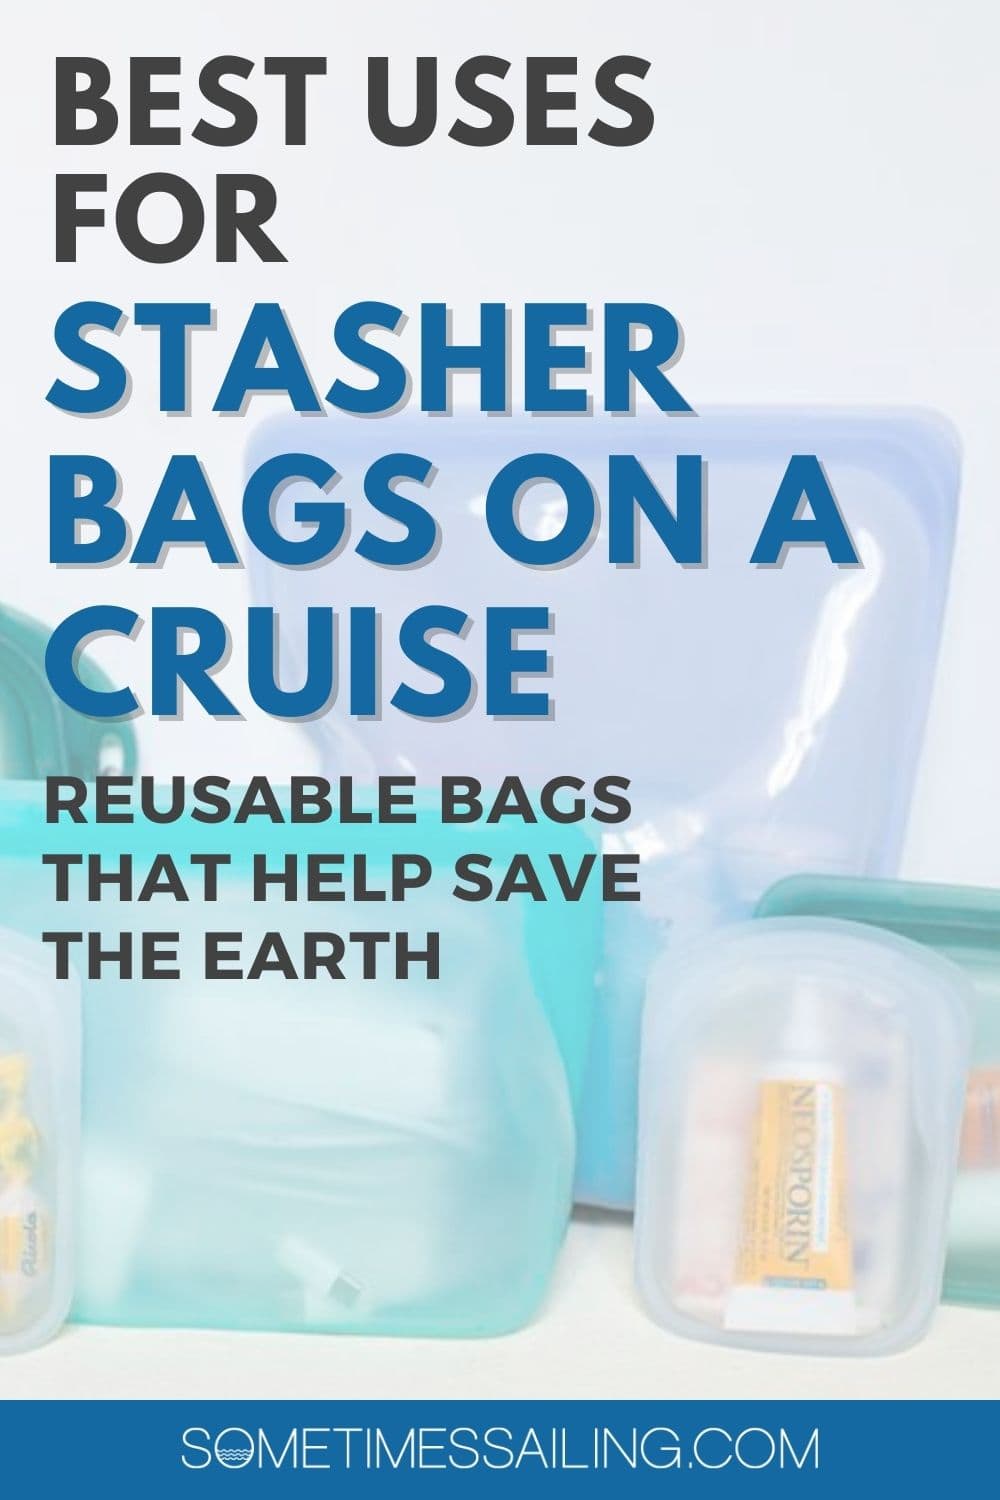 Best uses for Stasher Bags on a Cruise, reusable bags that help save the earth, with a picture of the bags faded behind the words.